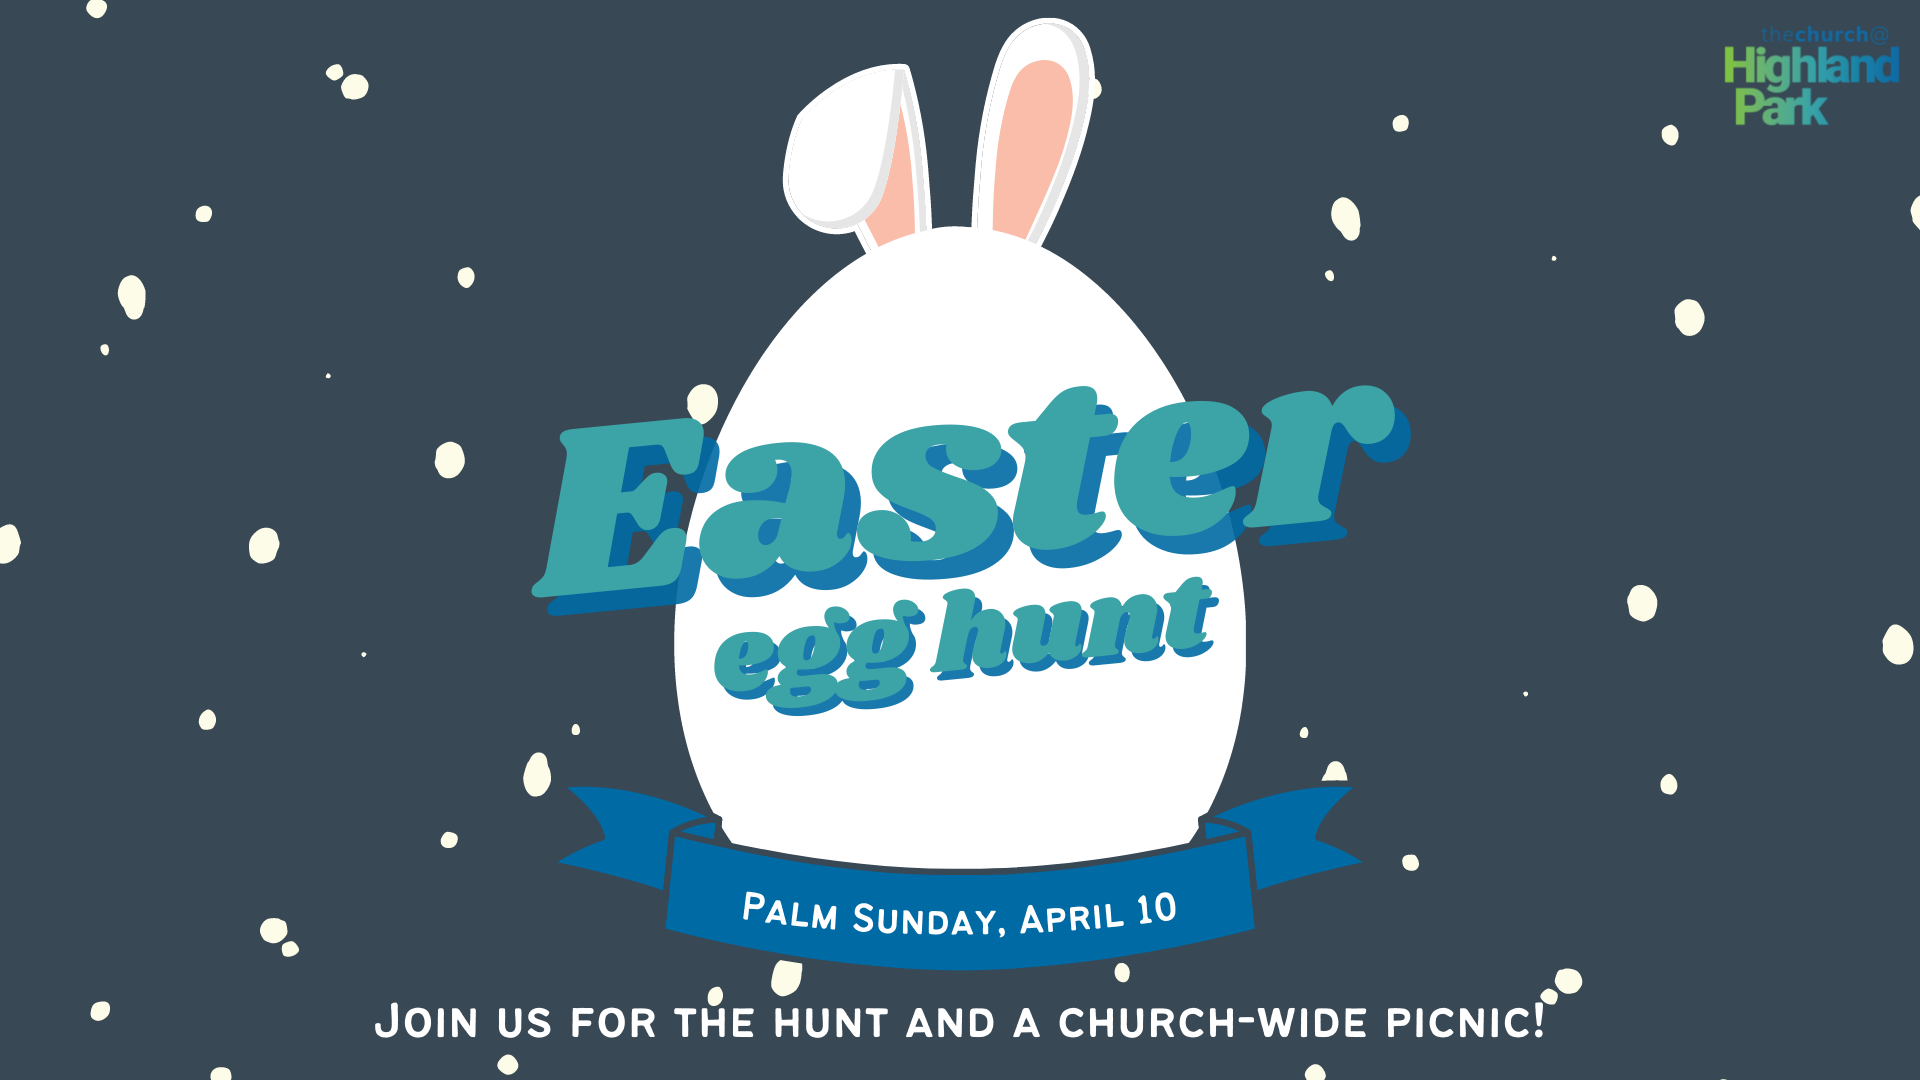 Palm Sunday Easter Egg Hunt and Church-wide Picnic on April tenth